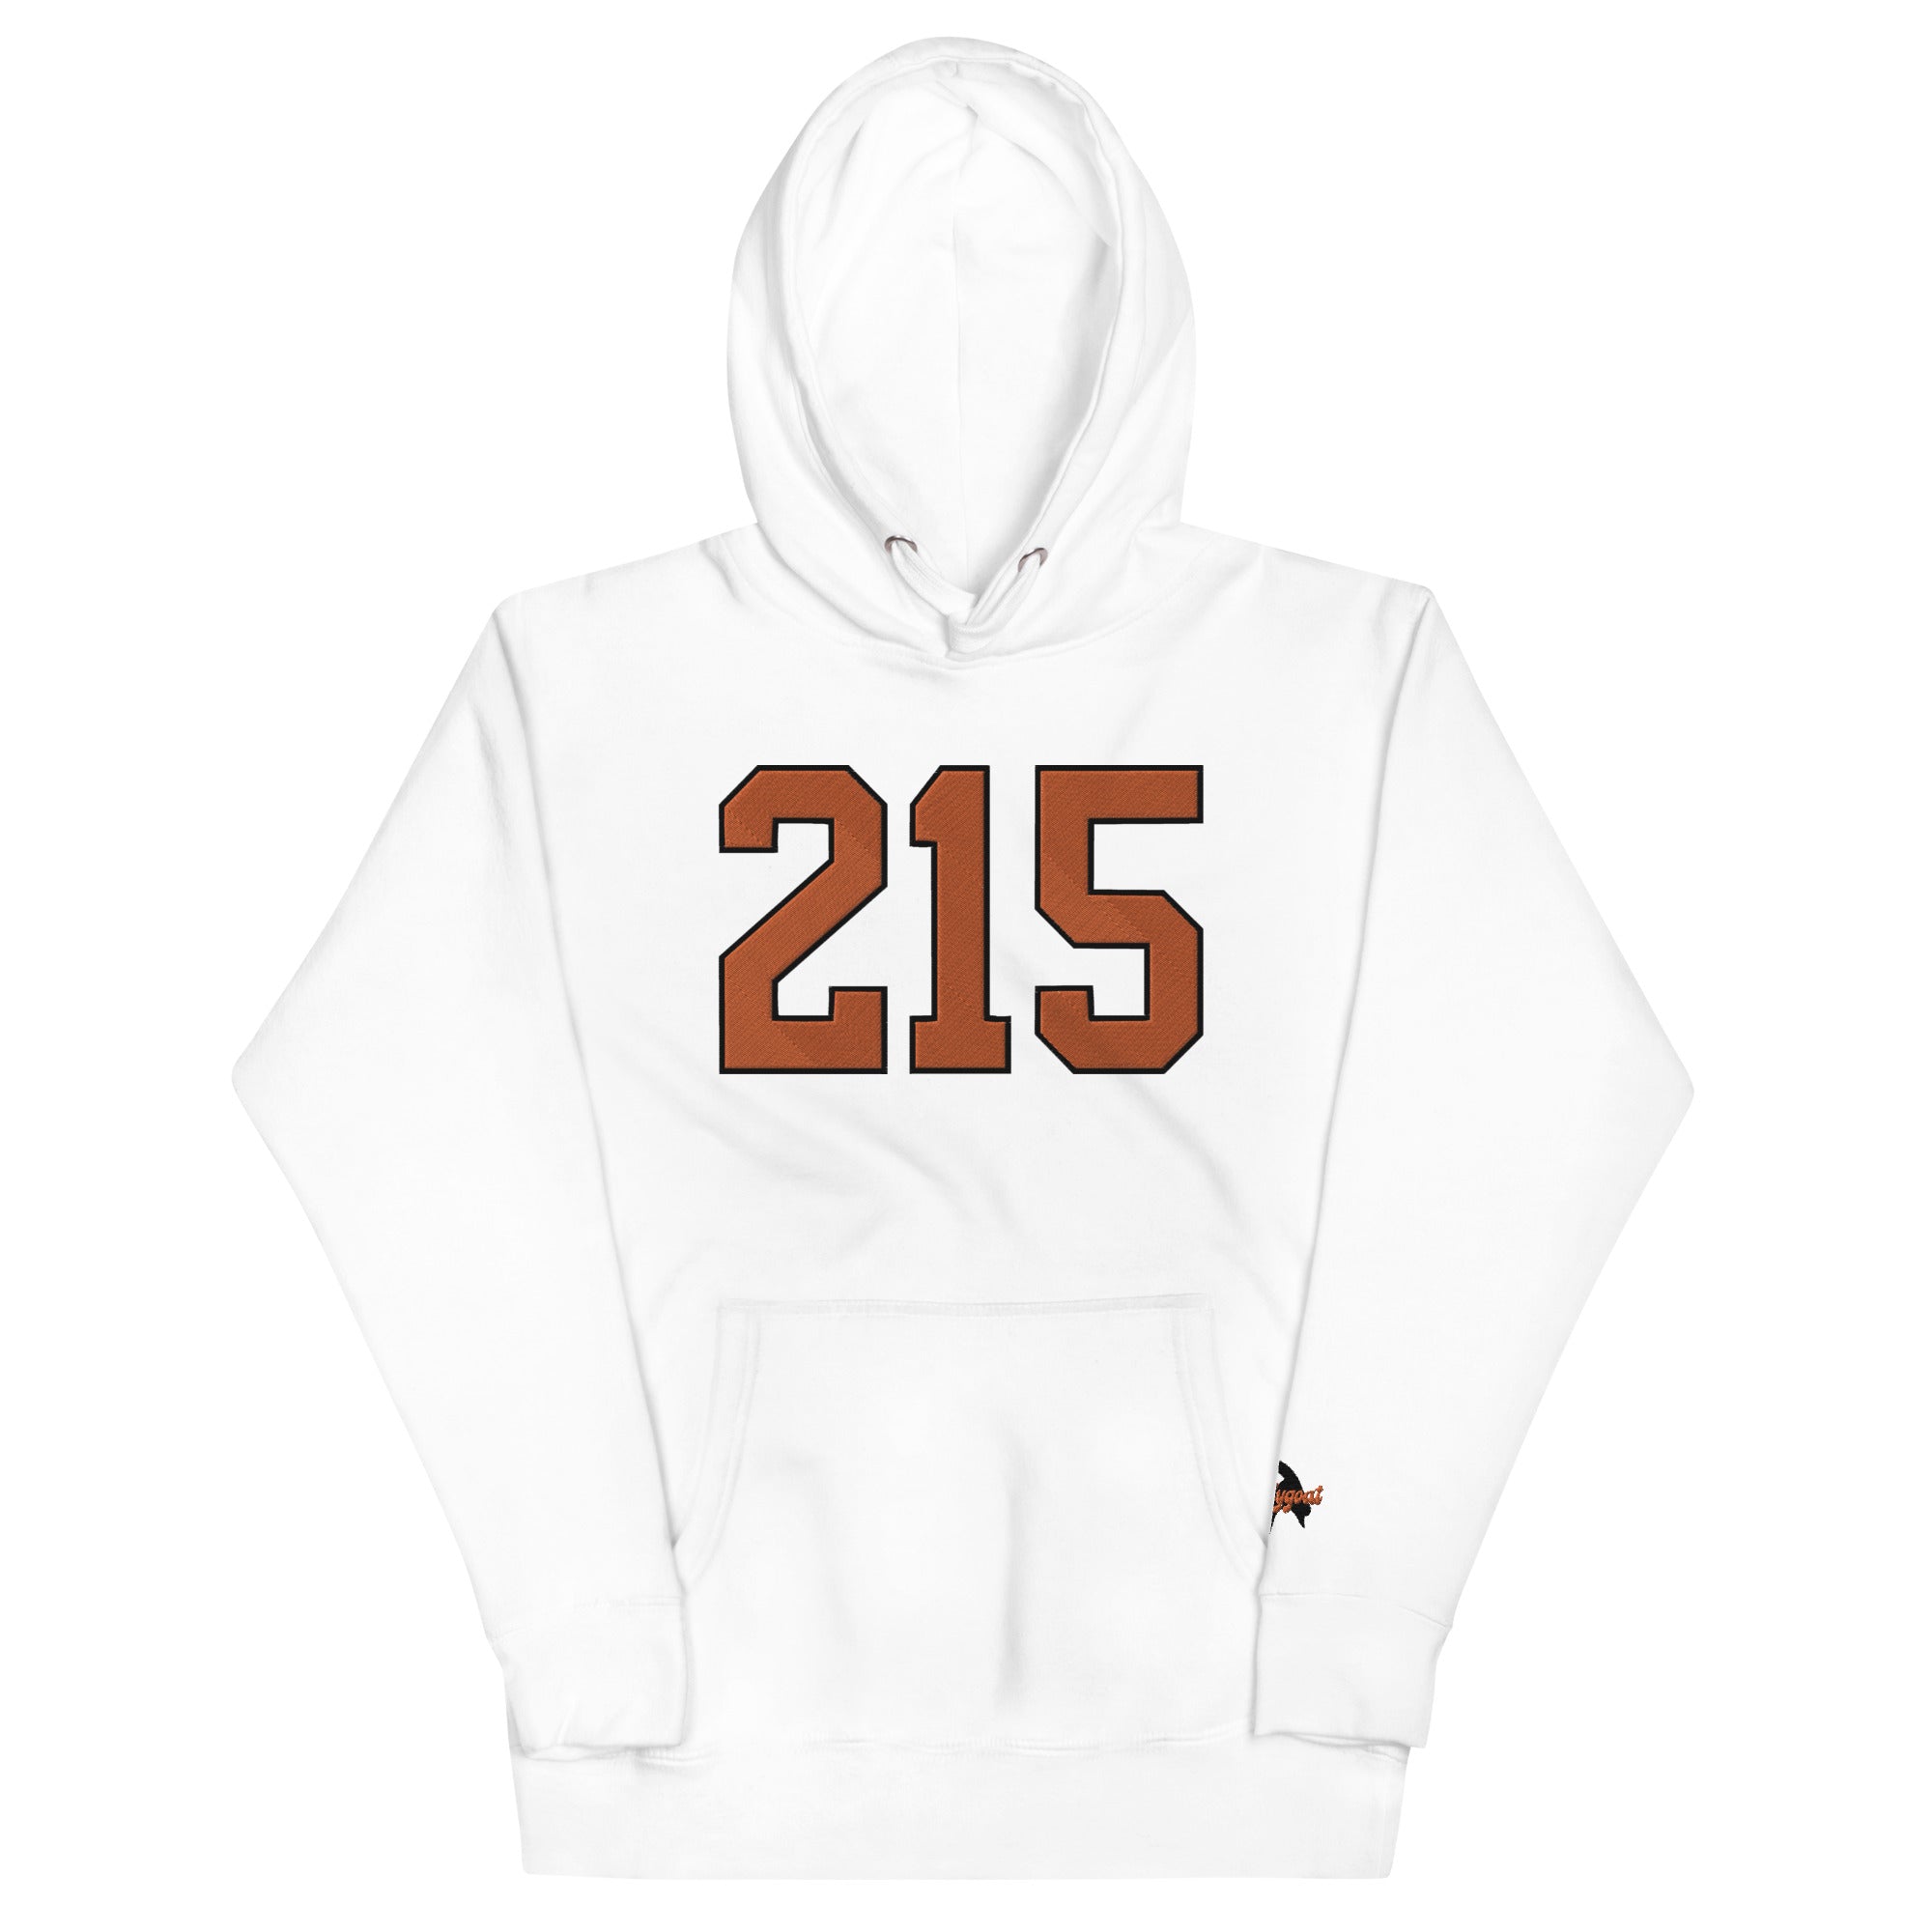 "215 Bully" Embroidered Hoodie